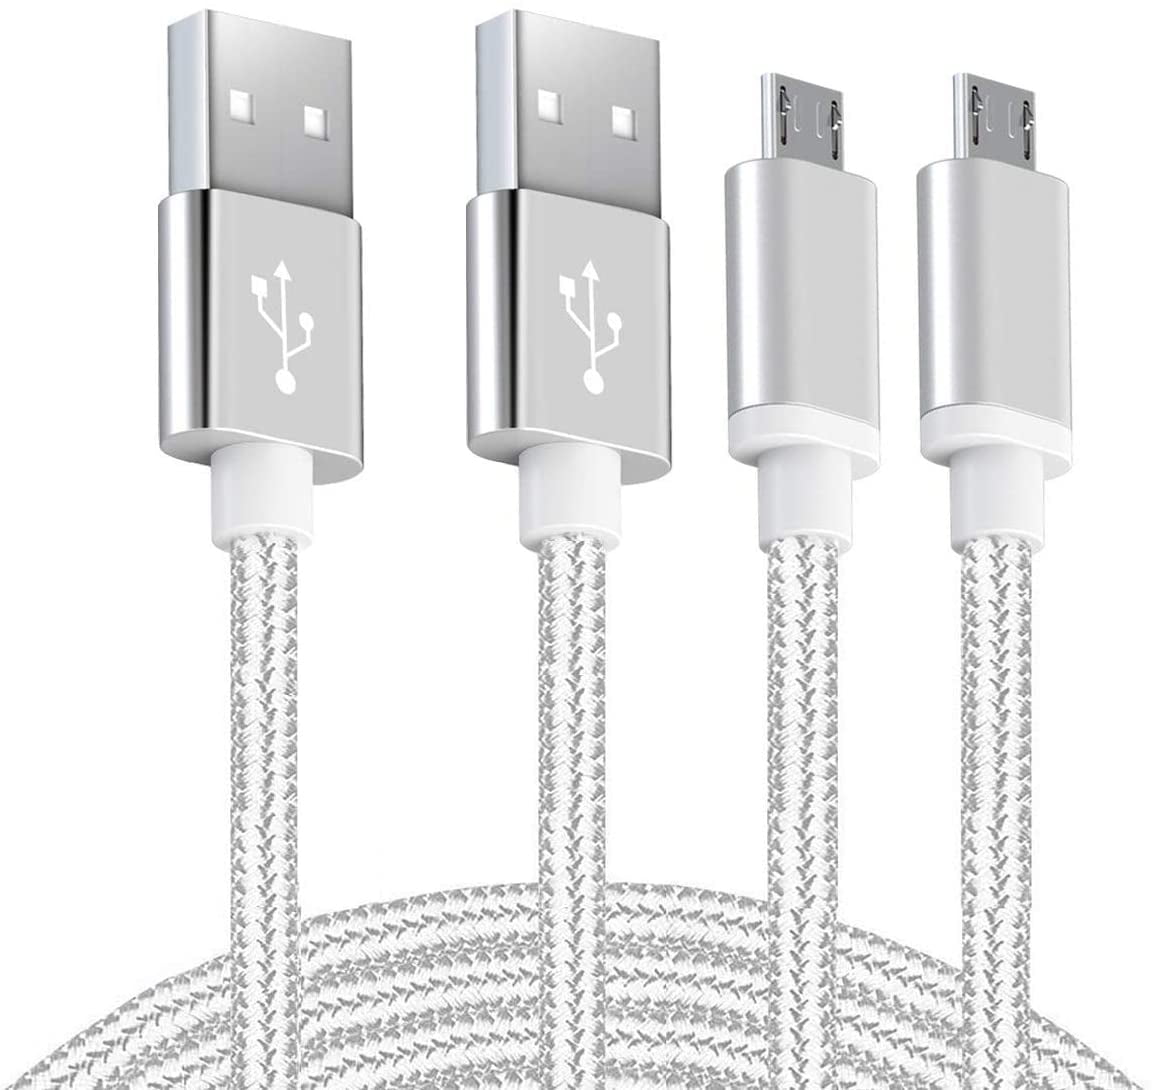 Moto E 2020 Android Charger Cable 4-Pack 6ft Fast Charging Micro USB Cable Android Phone Charger Power Cord for Samsung Galaxy S7 S6 Edge J7 J3 E6s G8 E6 G5 Kindle fire 7 8 10 LG Stylo 3 2 K30 